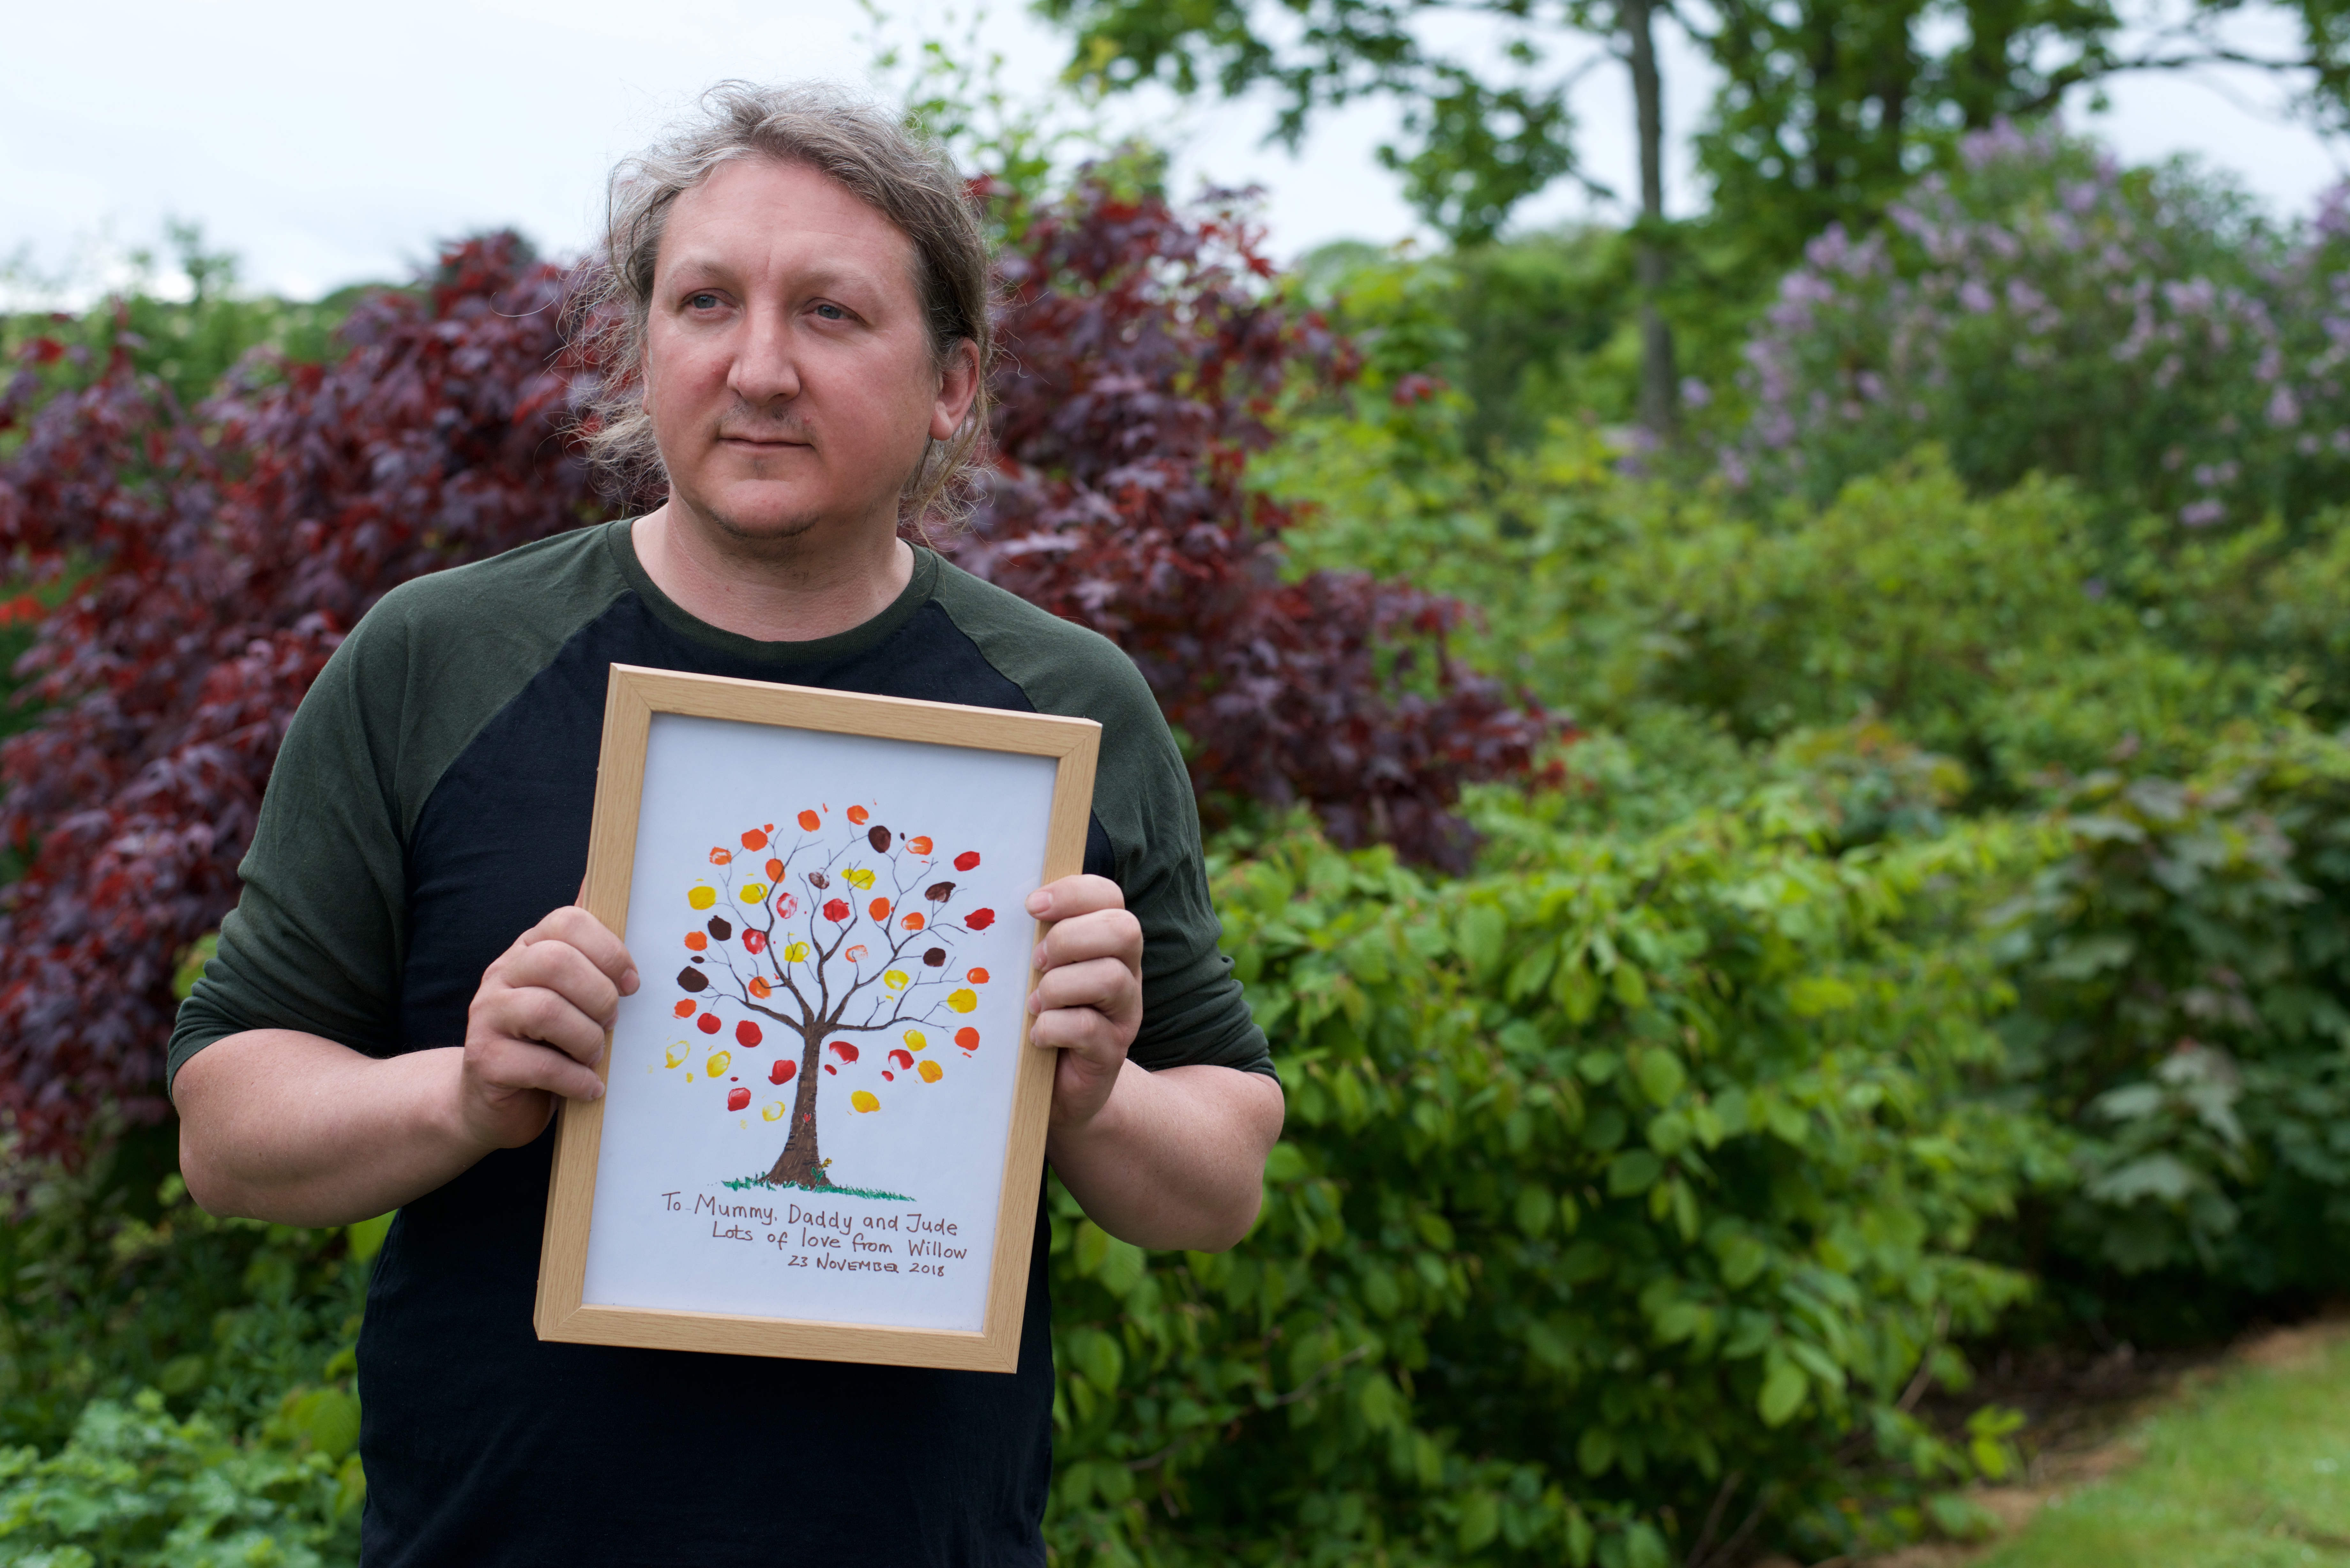 David Scanlan is backing a Chas campaign showing solidarity with other bereaved fathers.